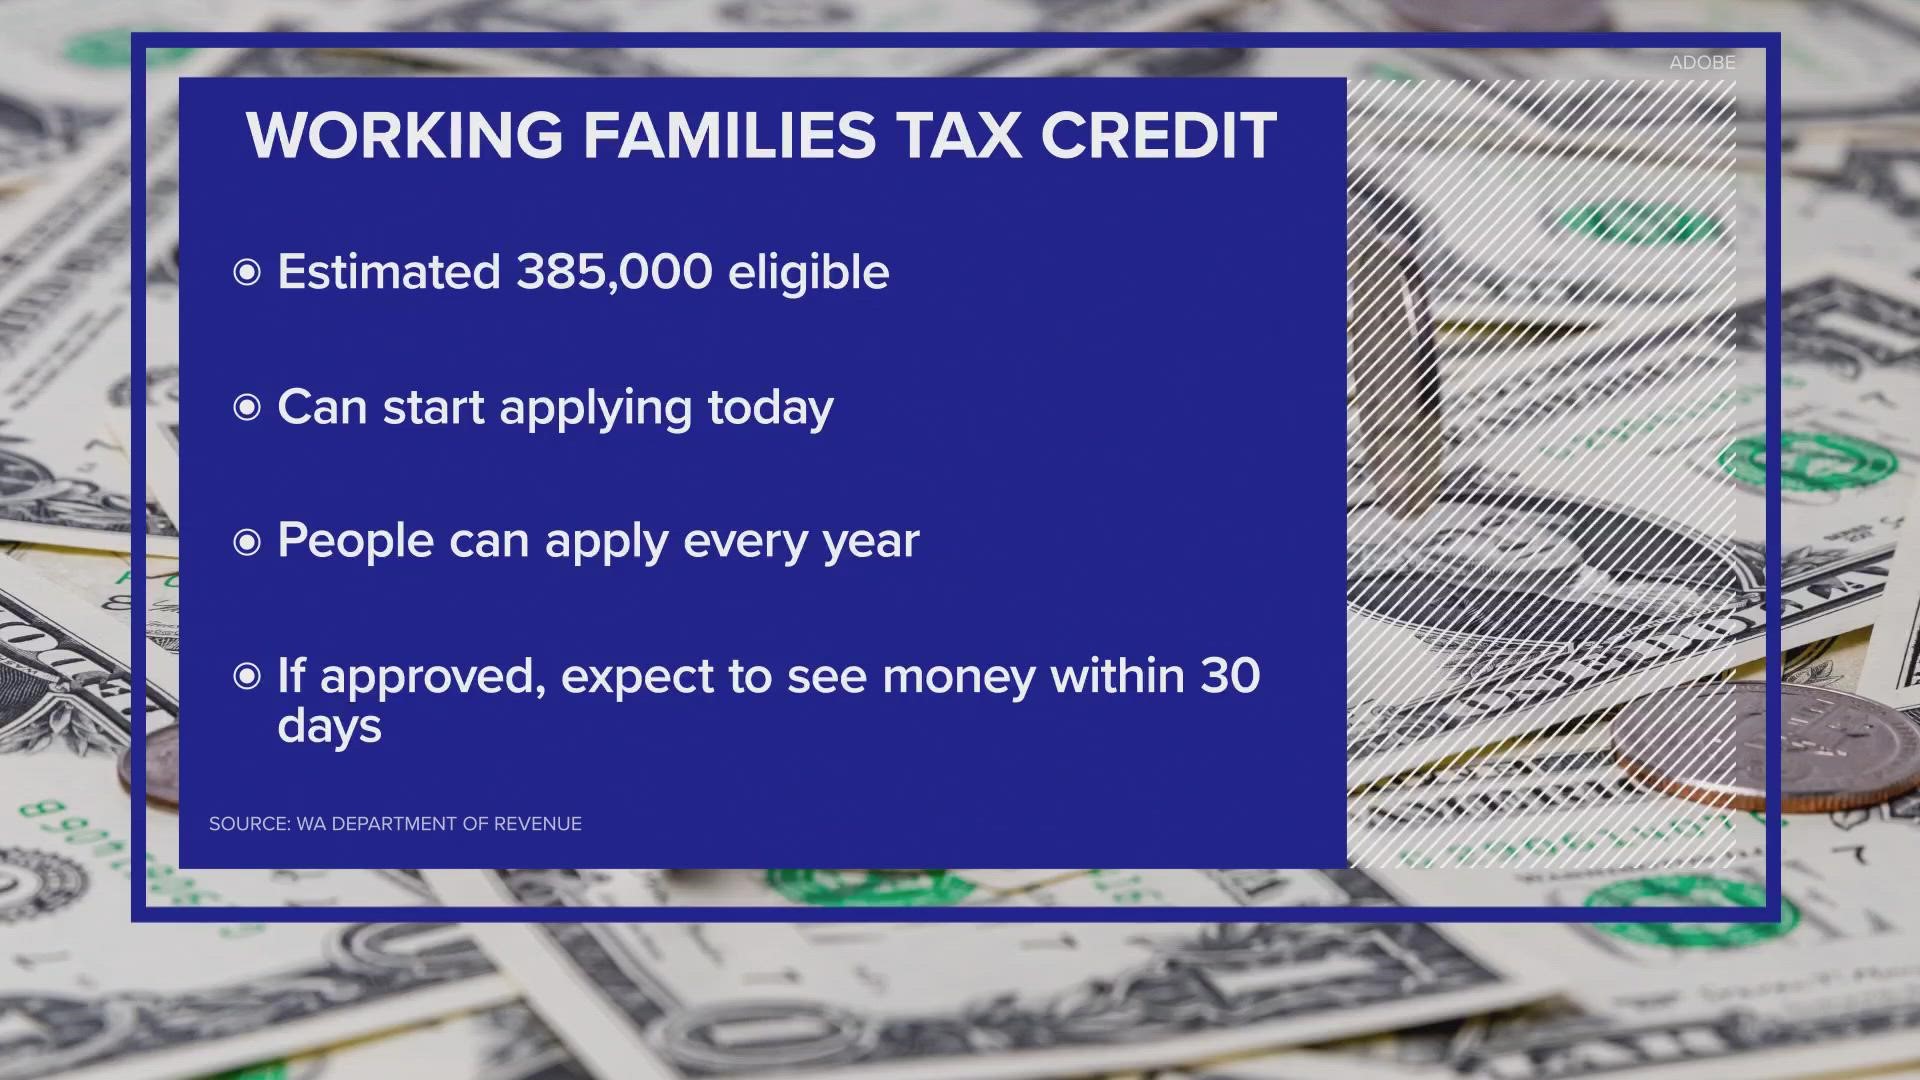 The Working Families Tax Credit could give qualifying individuals up to $1,200.